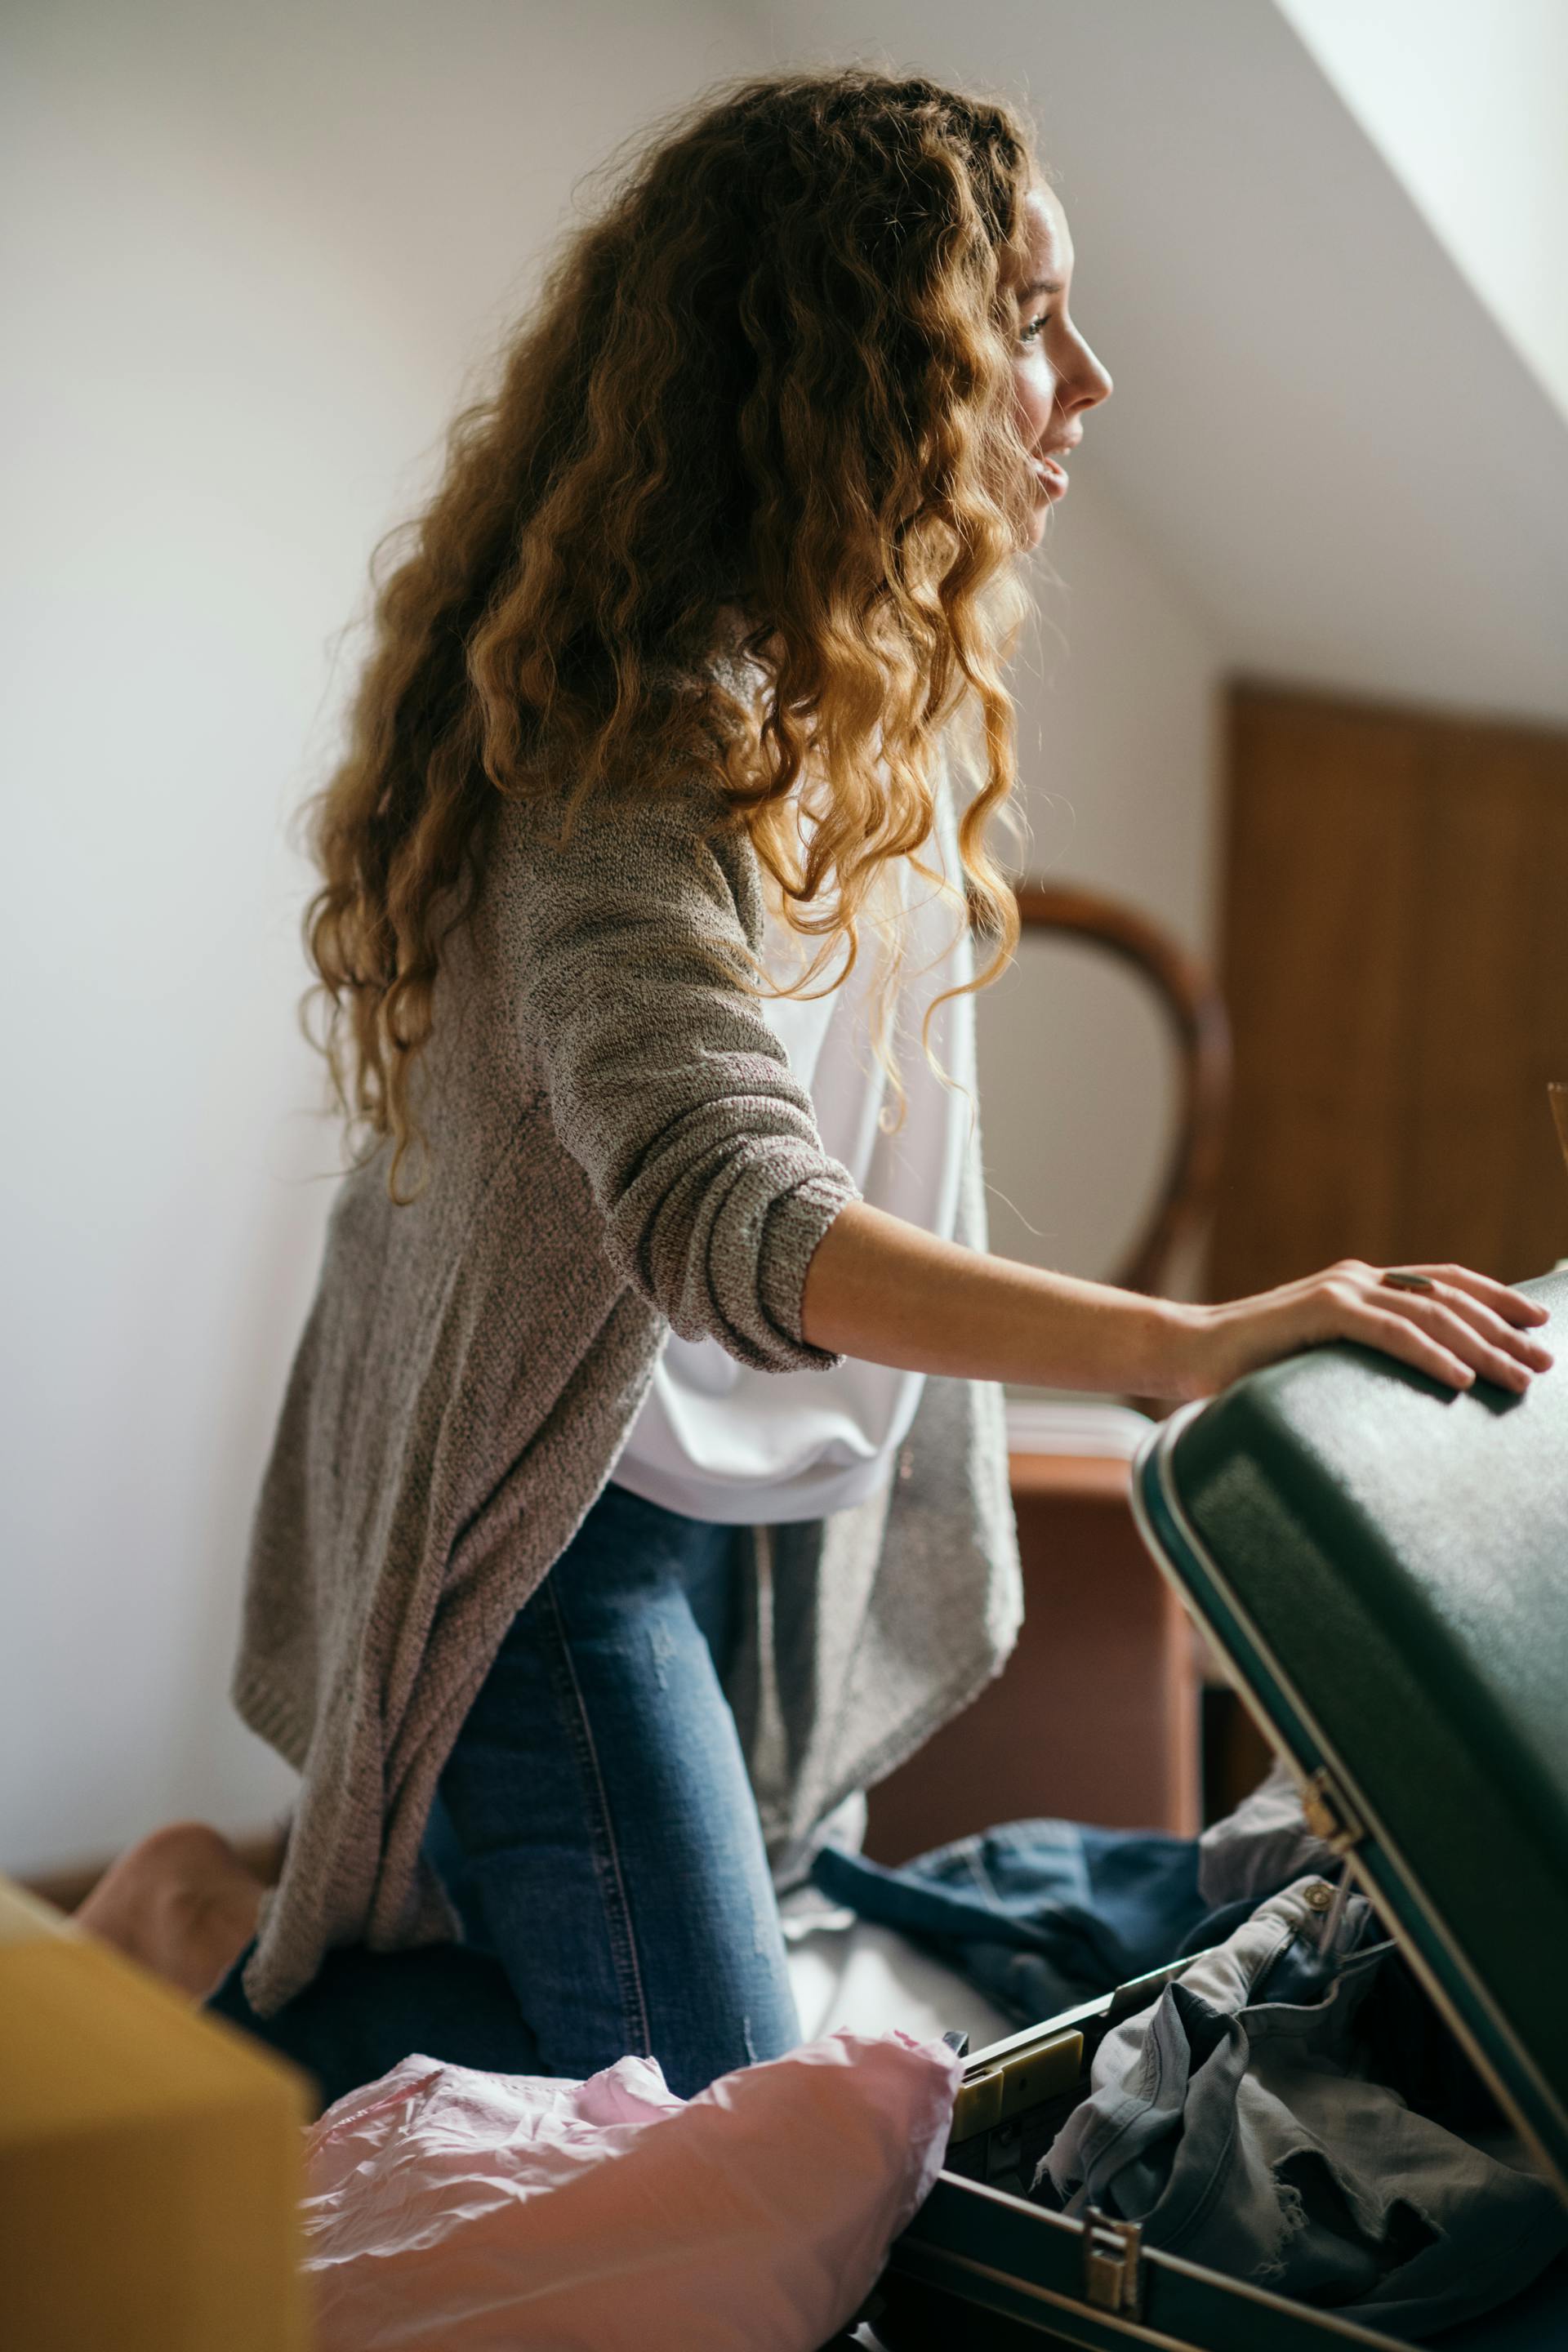 A woman packing her things | Source: Pexels